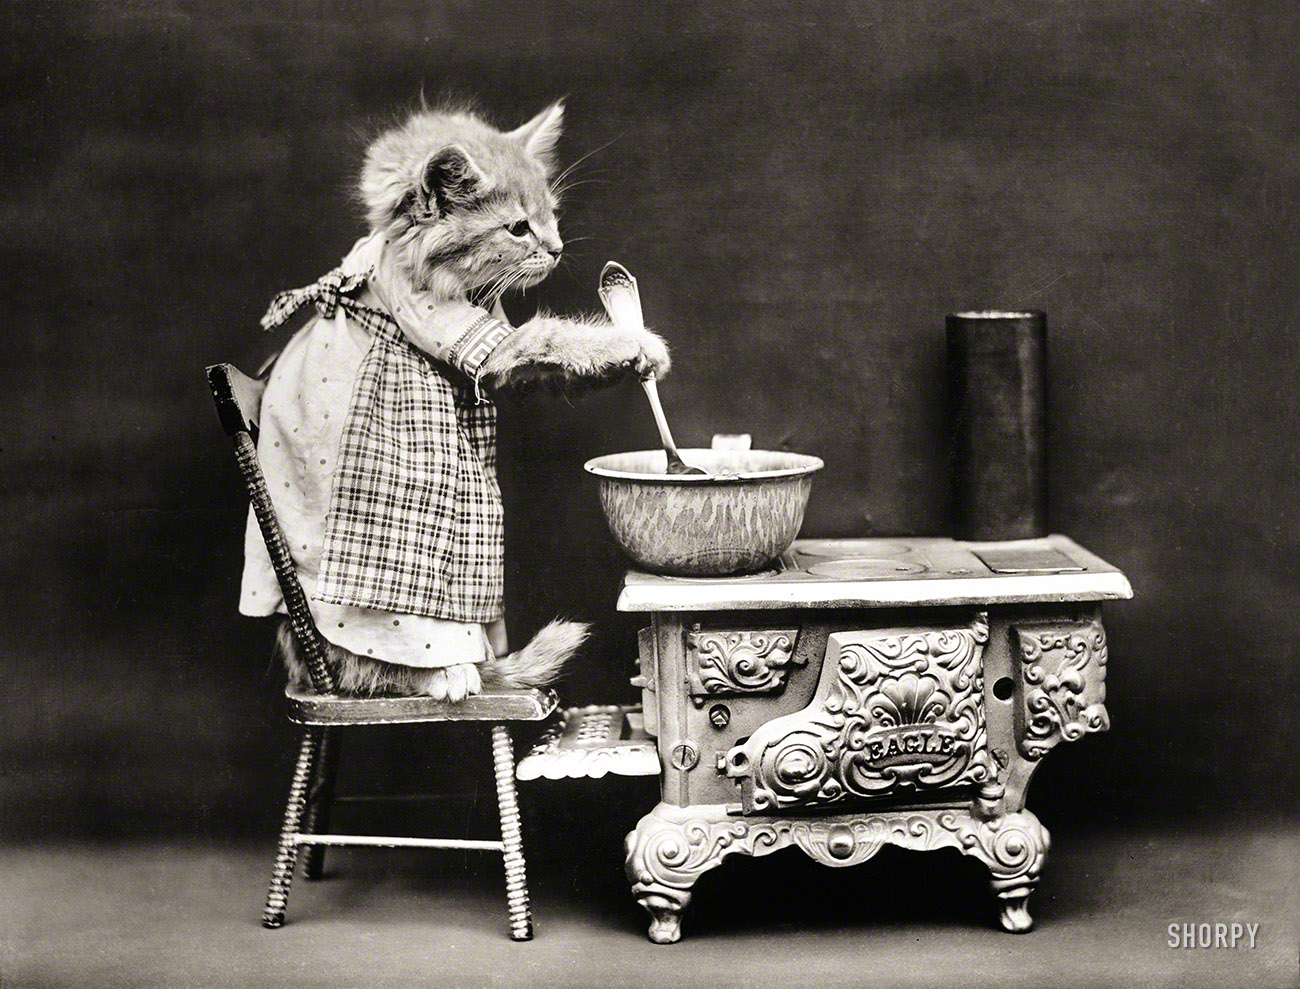 1914. "Cat wearing apron, stirring pot on miniature stove." As seen on the classic cooking show Kitten Kitchen. Photo by Harry W. Frees. View full size.